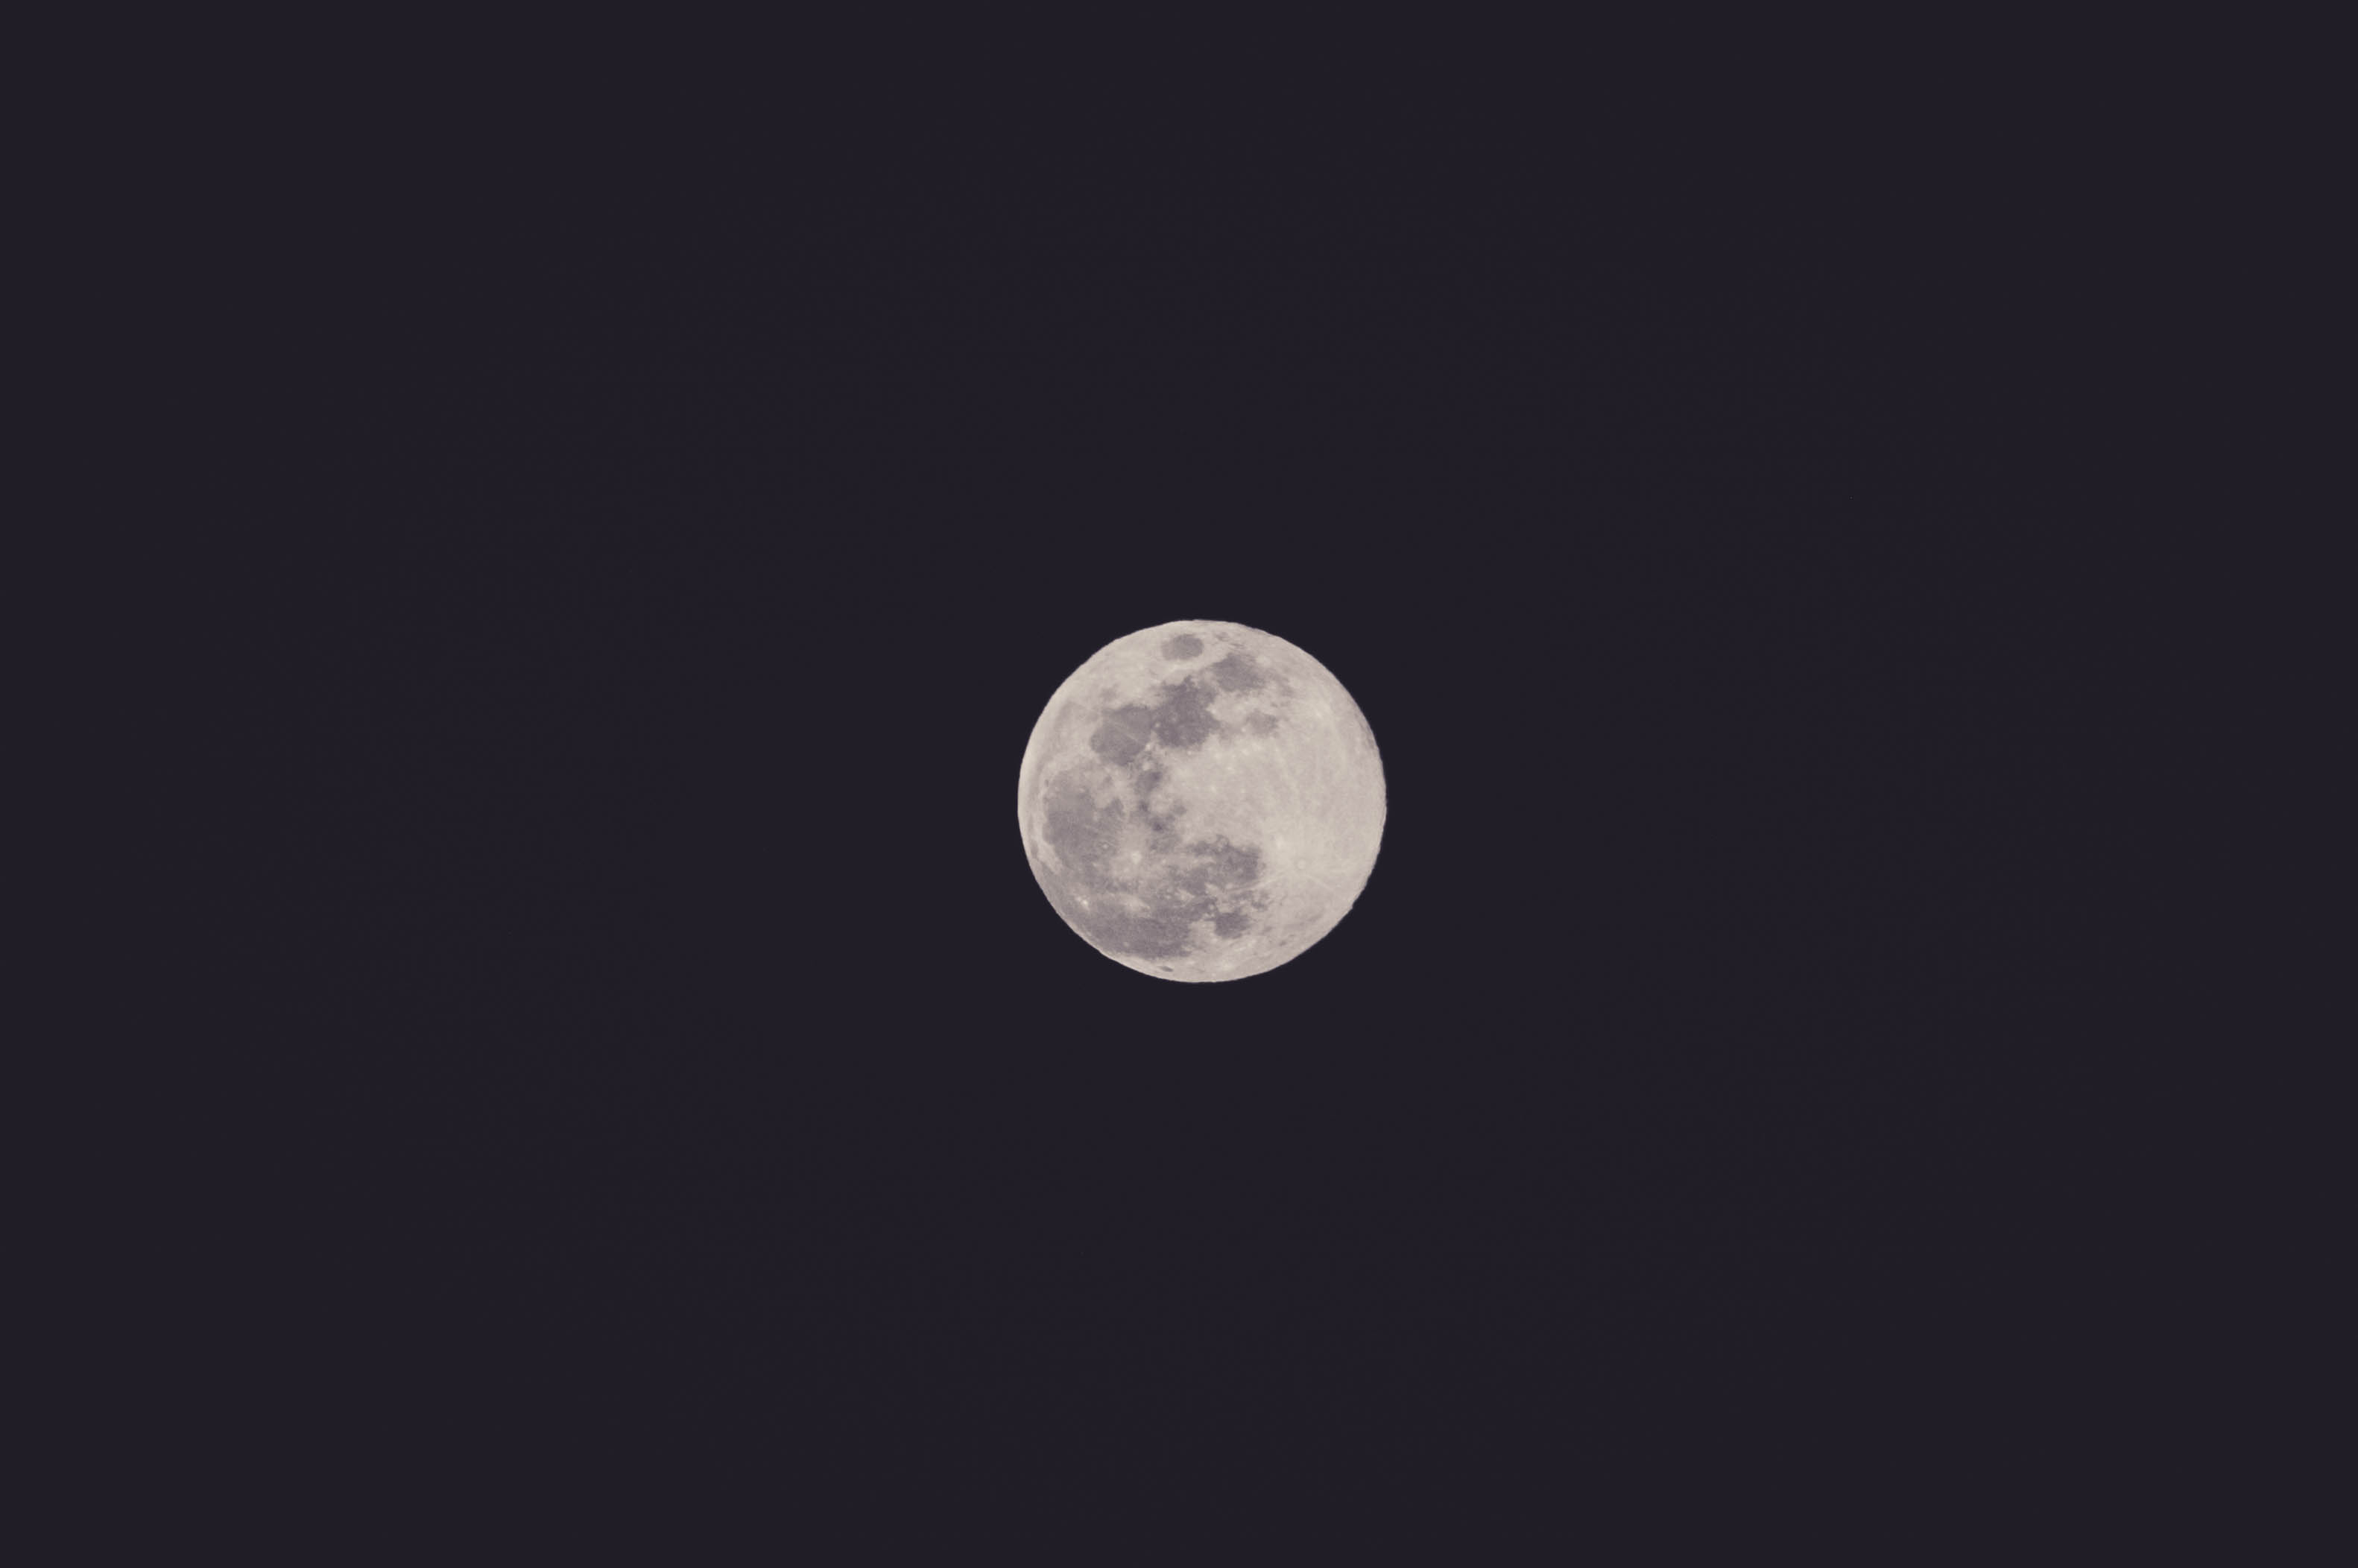 By the Light of the Full Moon: A Foreigner’s Perspective of a Moon Viewing Party